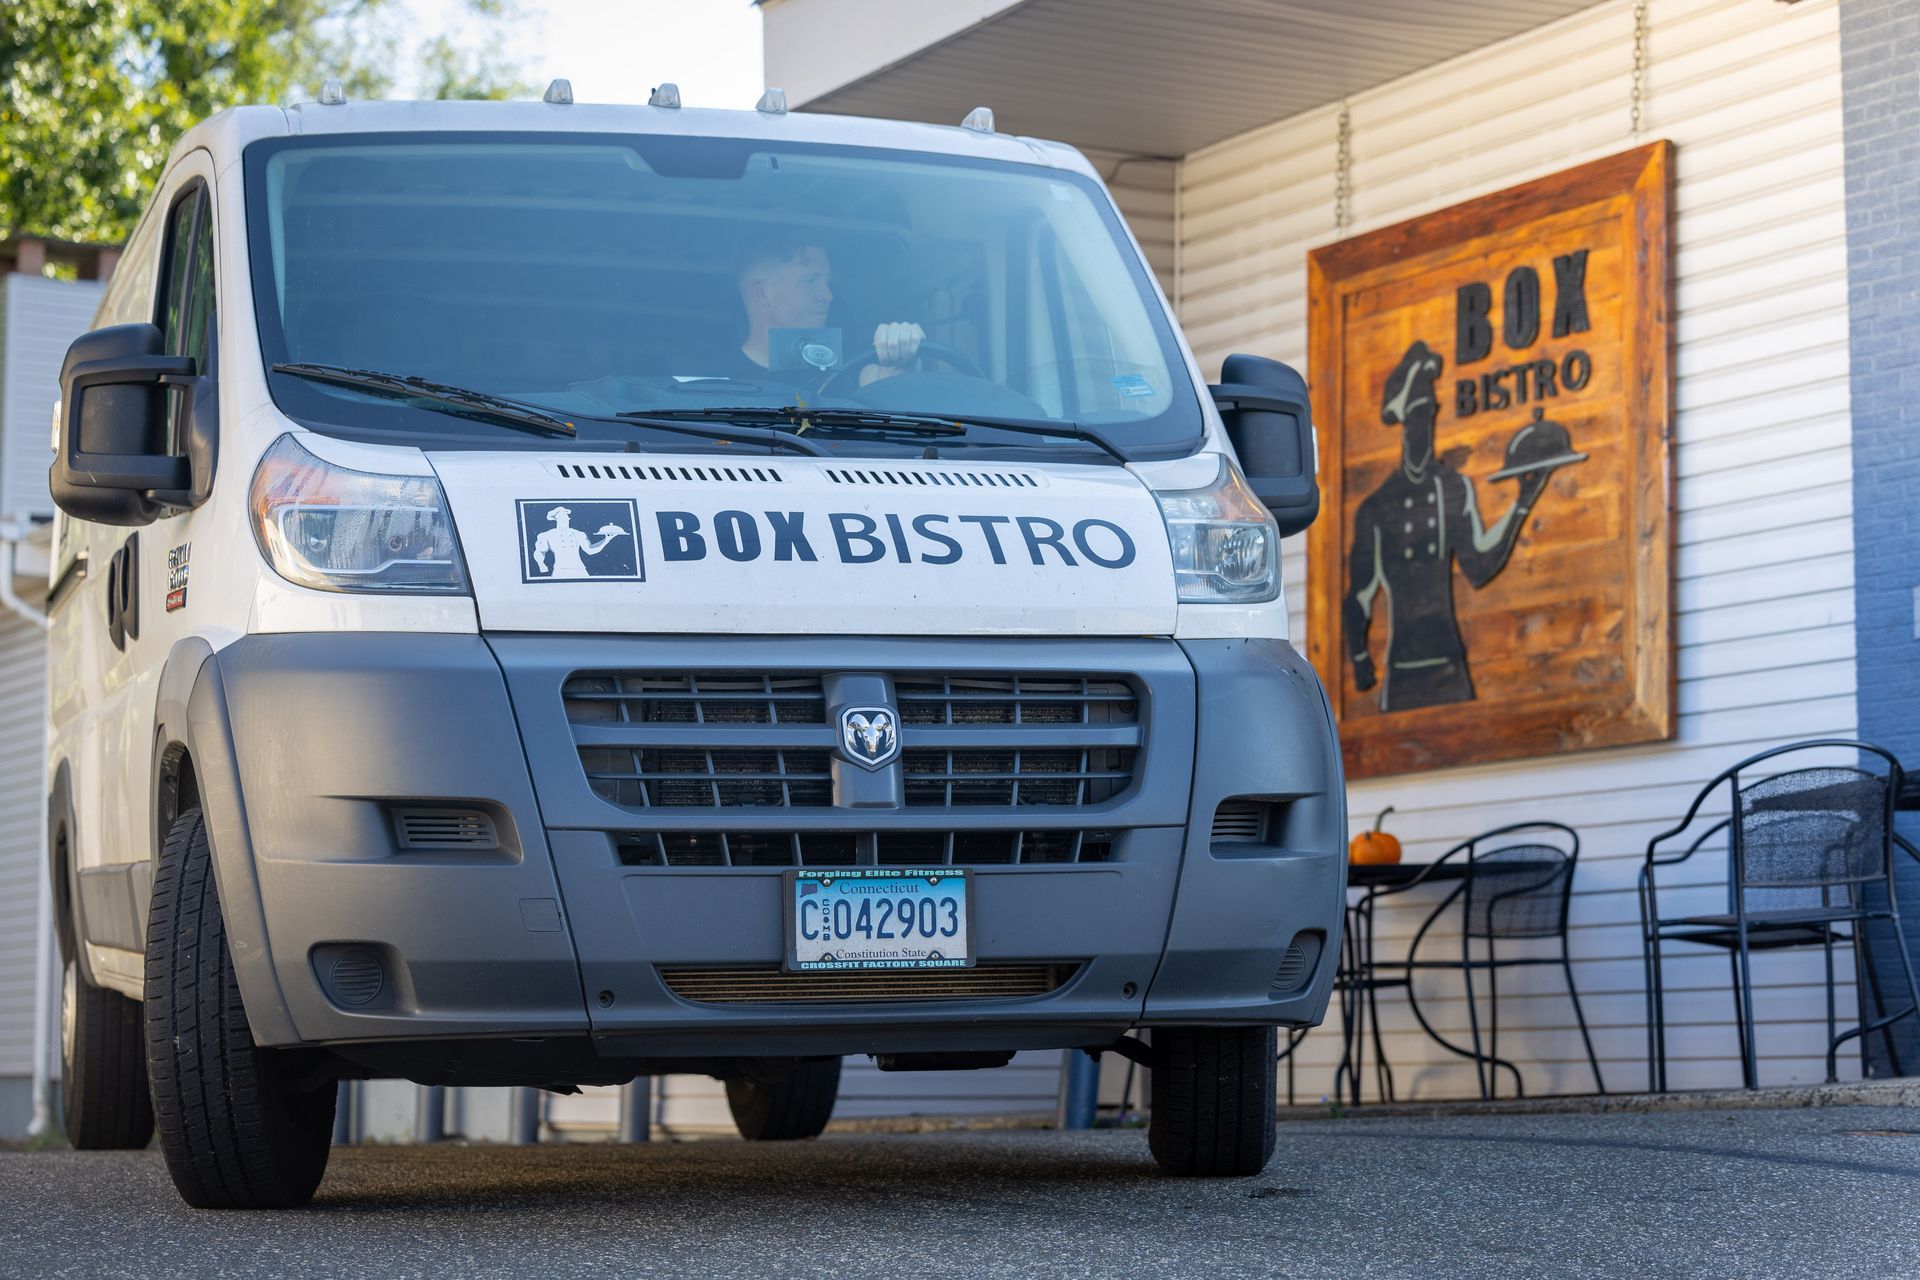 Box Bistro delivery van outside storefront